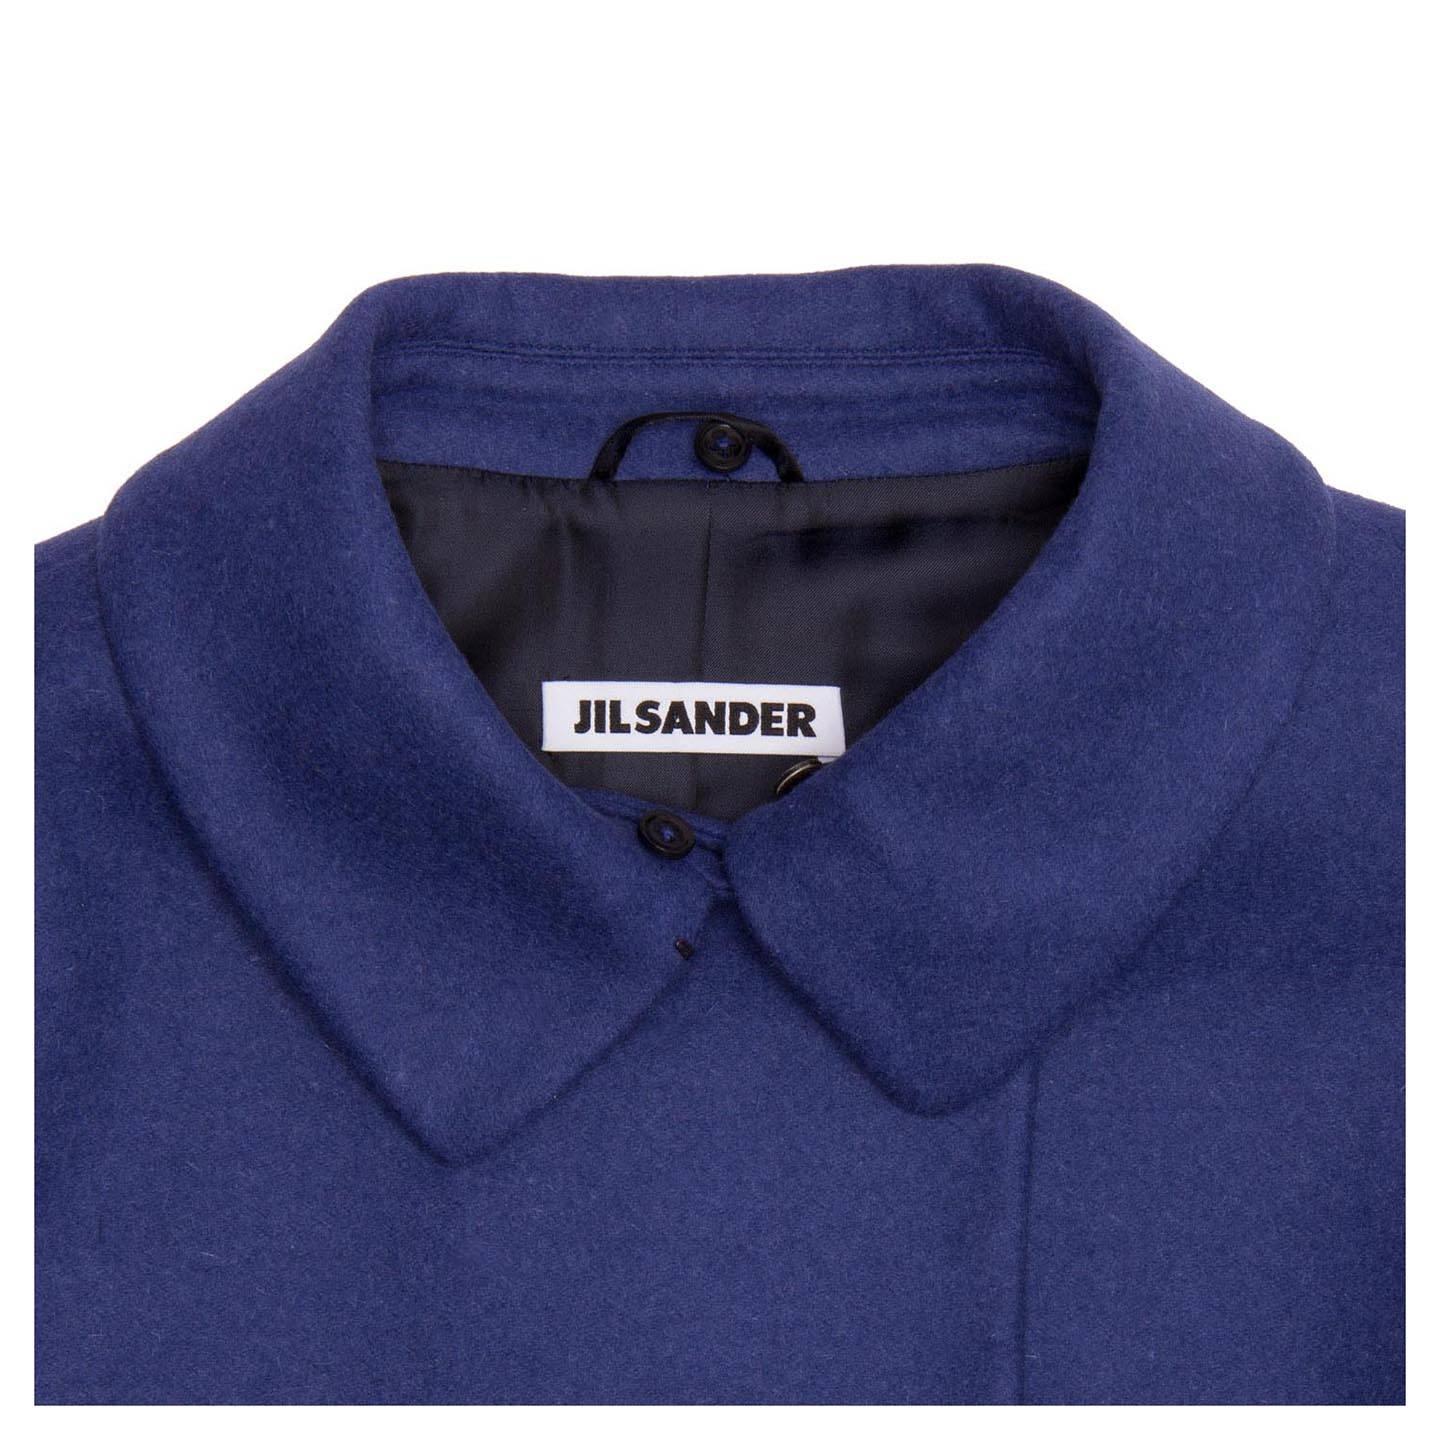 Jil Sander Blue Wool & Fur Short Jacket In New Condition For Sale In Brooklyn, NY